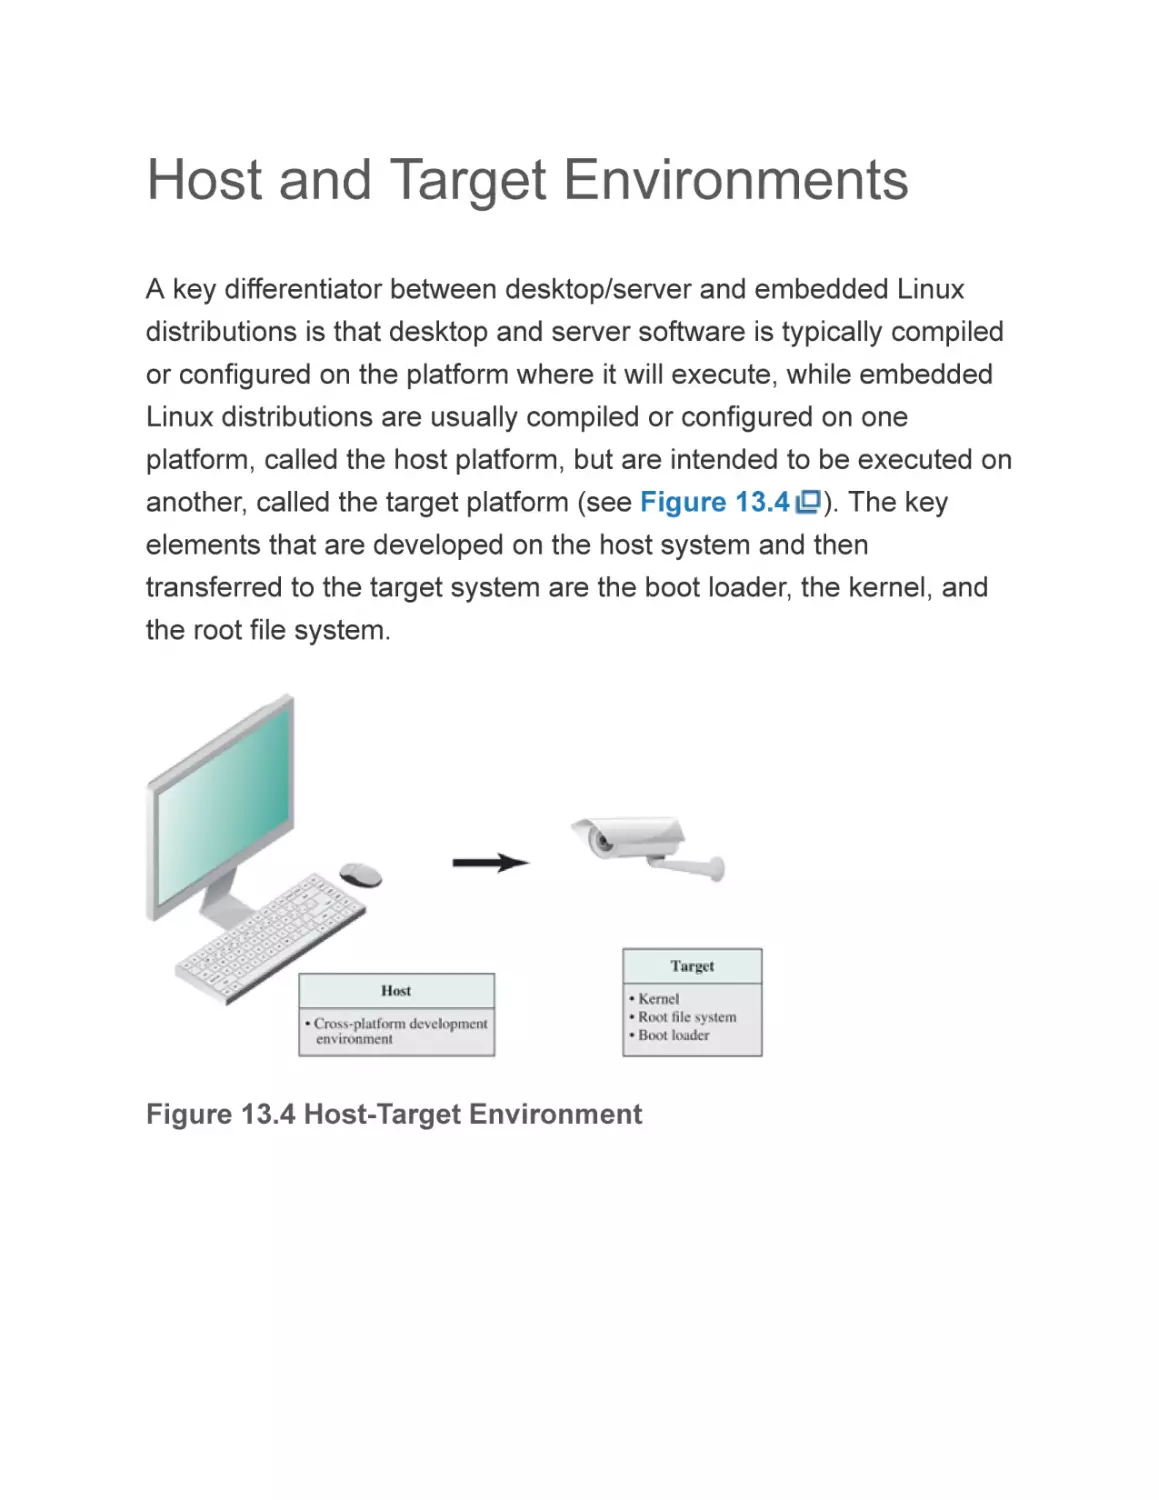 Host and Target Environments